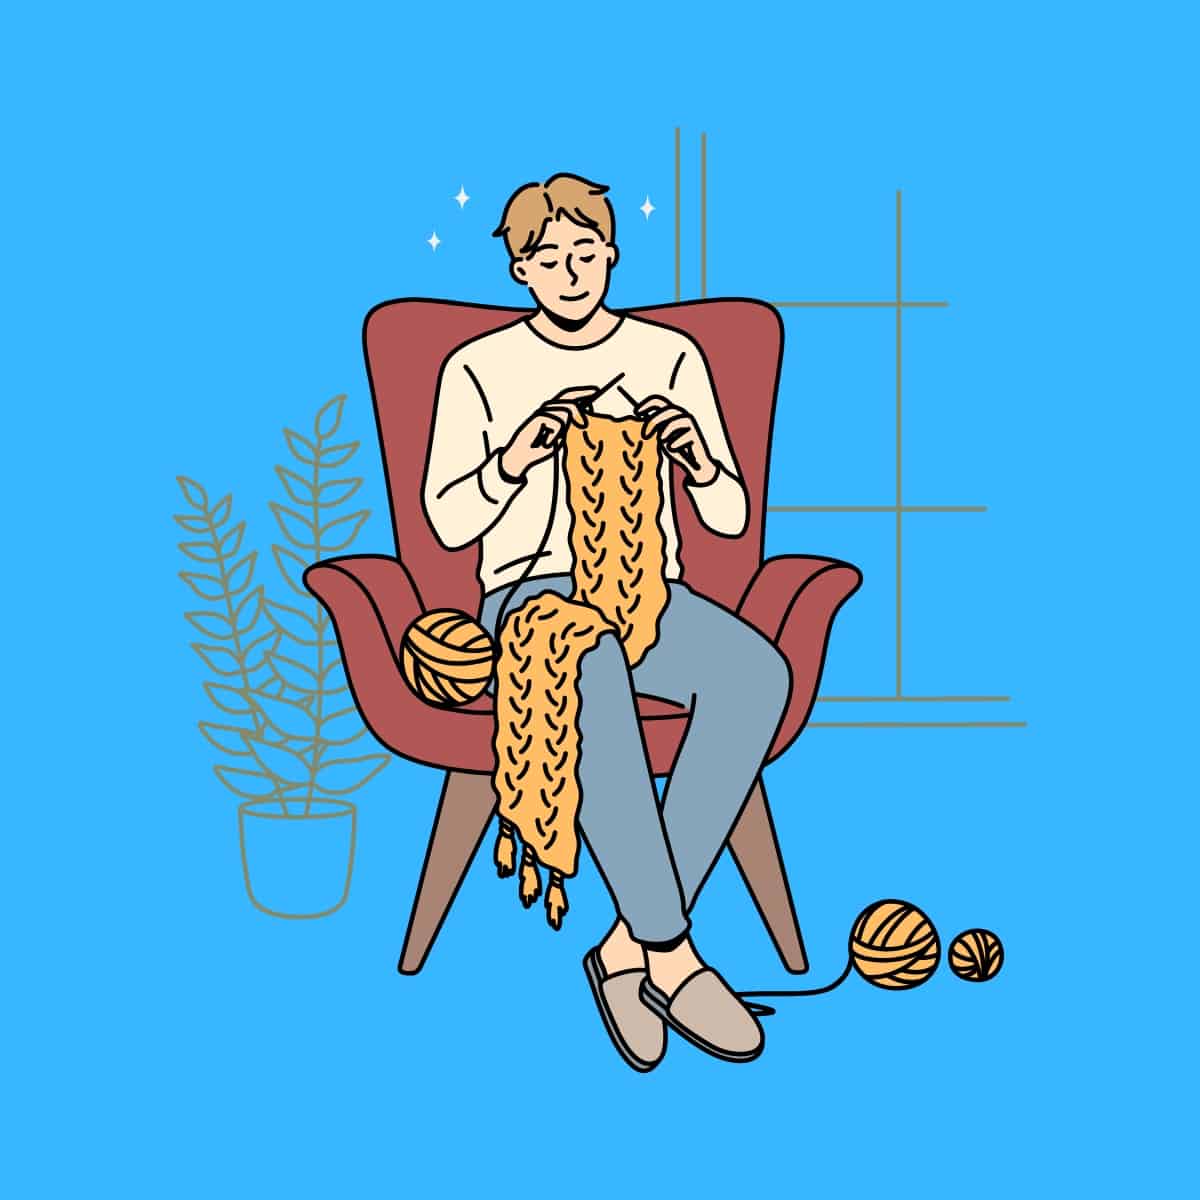 Cartoon graphic of a man in a seat knitting on blue background.